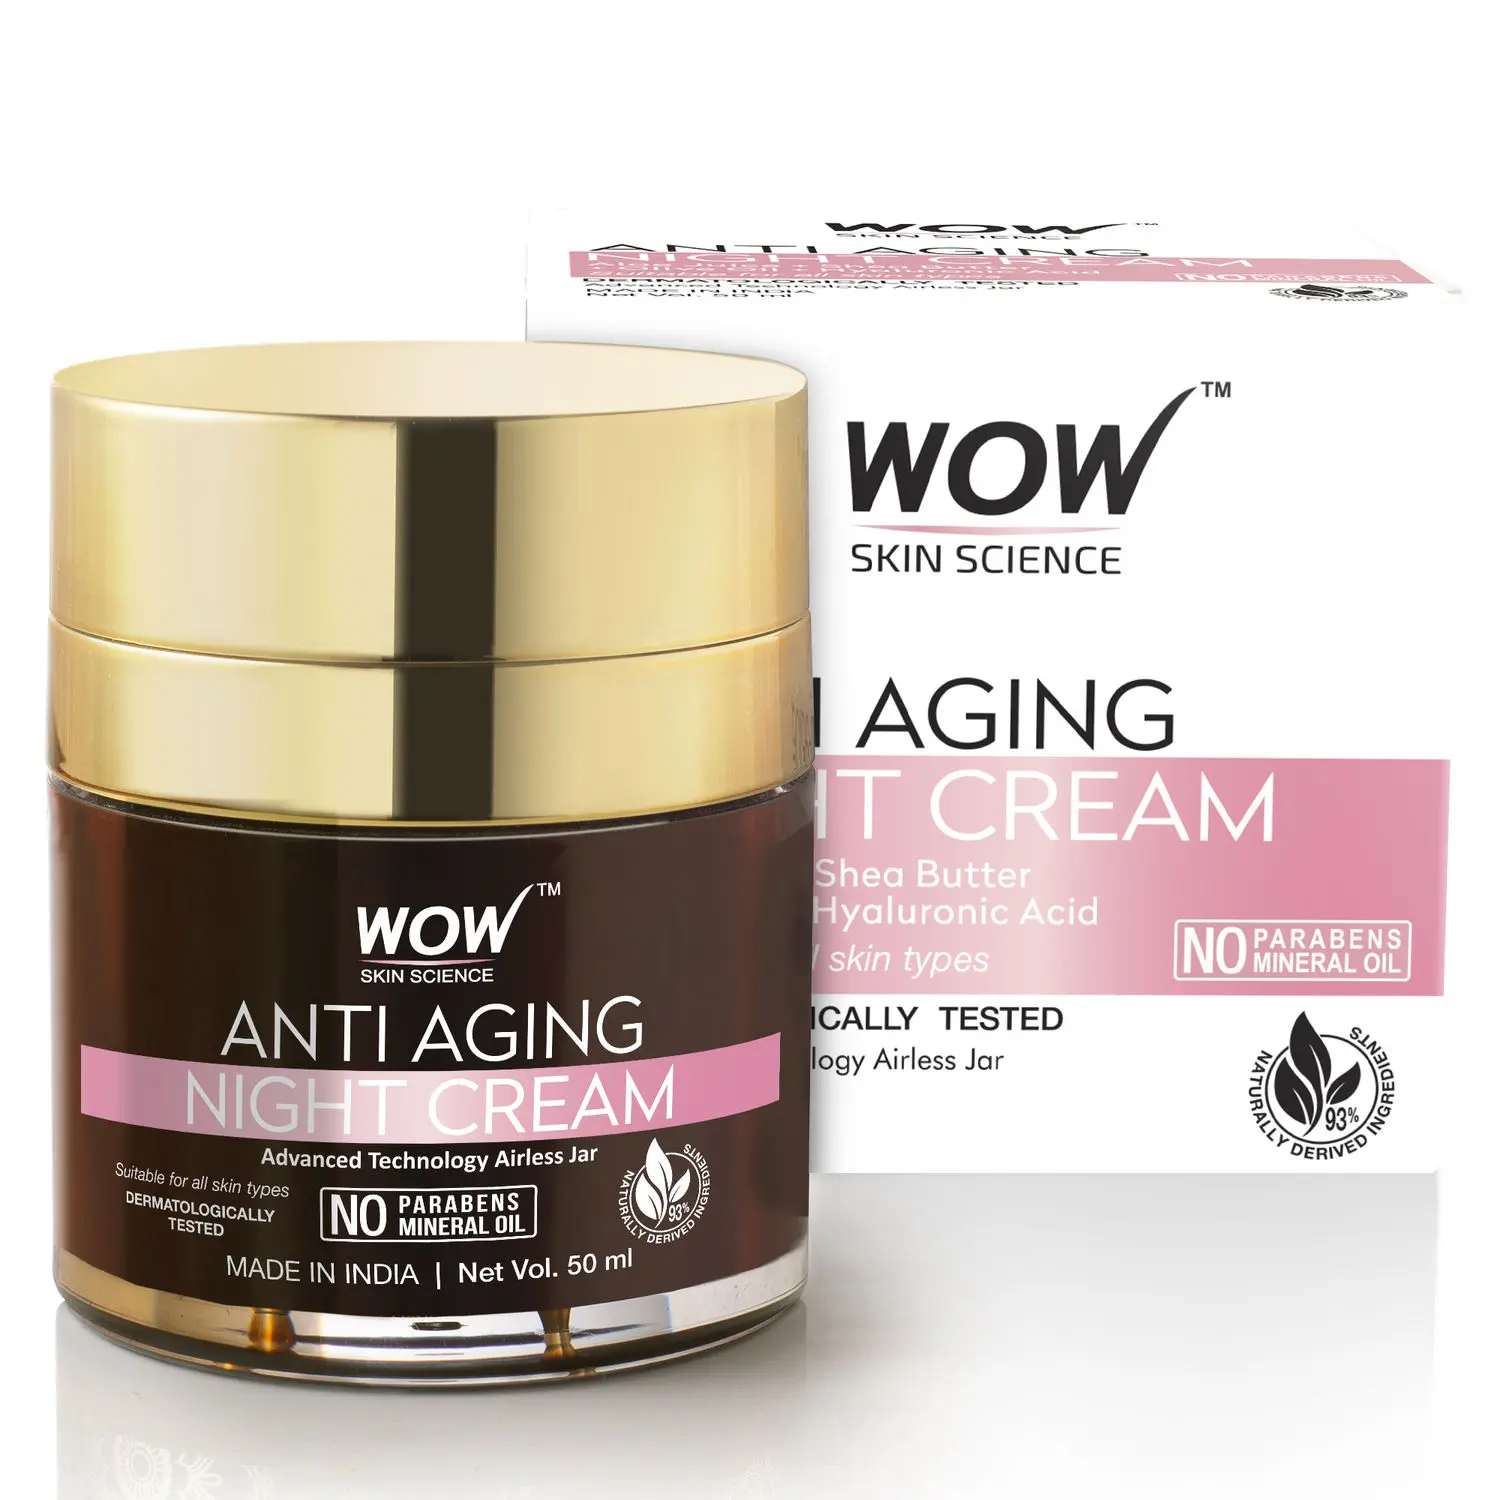 WOW Skin Science Anti Aging Night Cream- Anti wrinkles and Fine lines- No Parabens & Mineral Oil Night Cream, 50mL